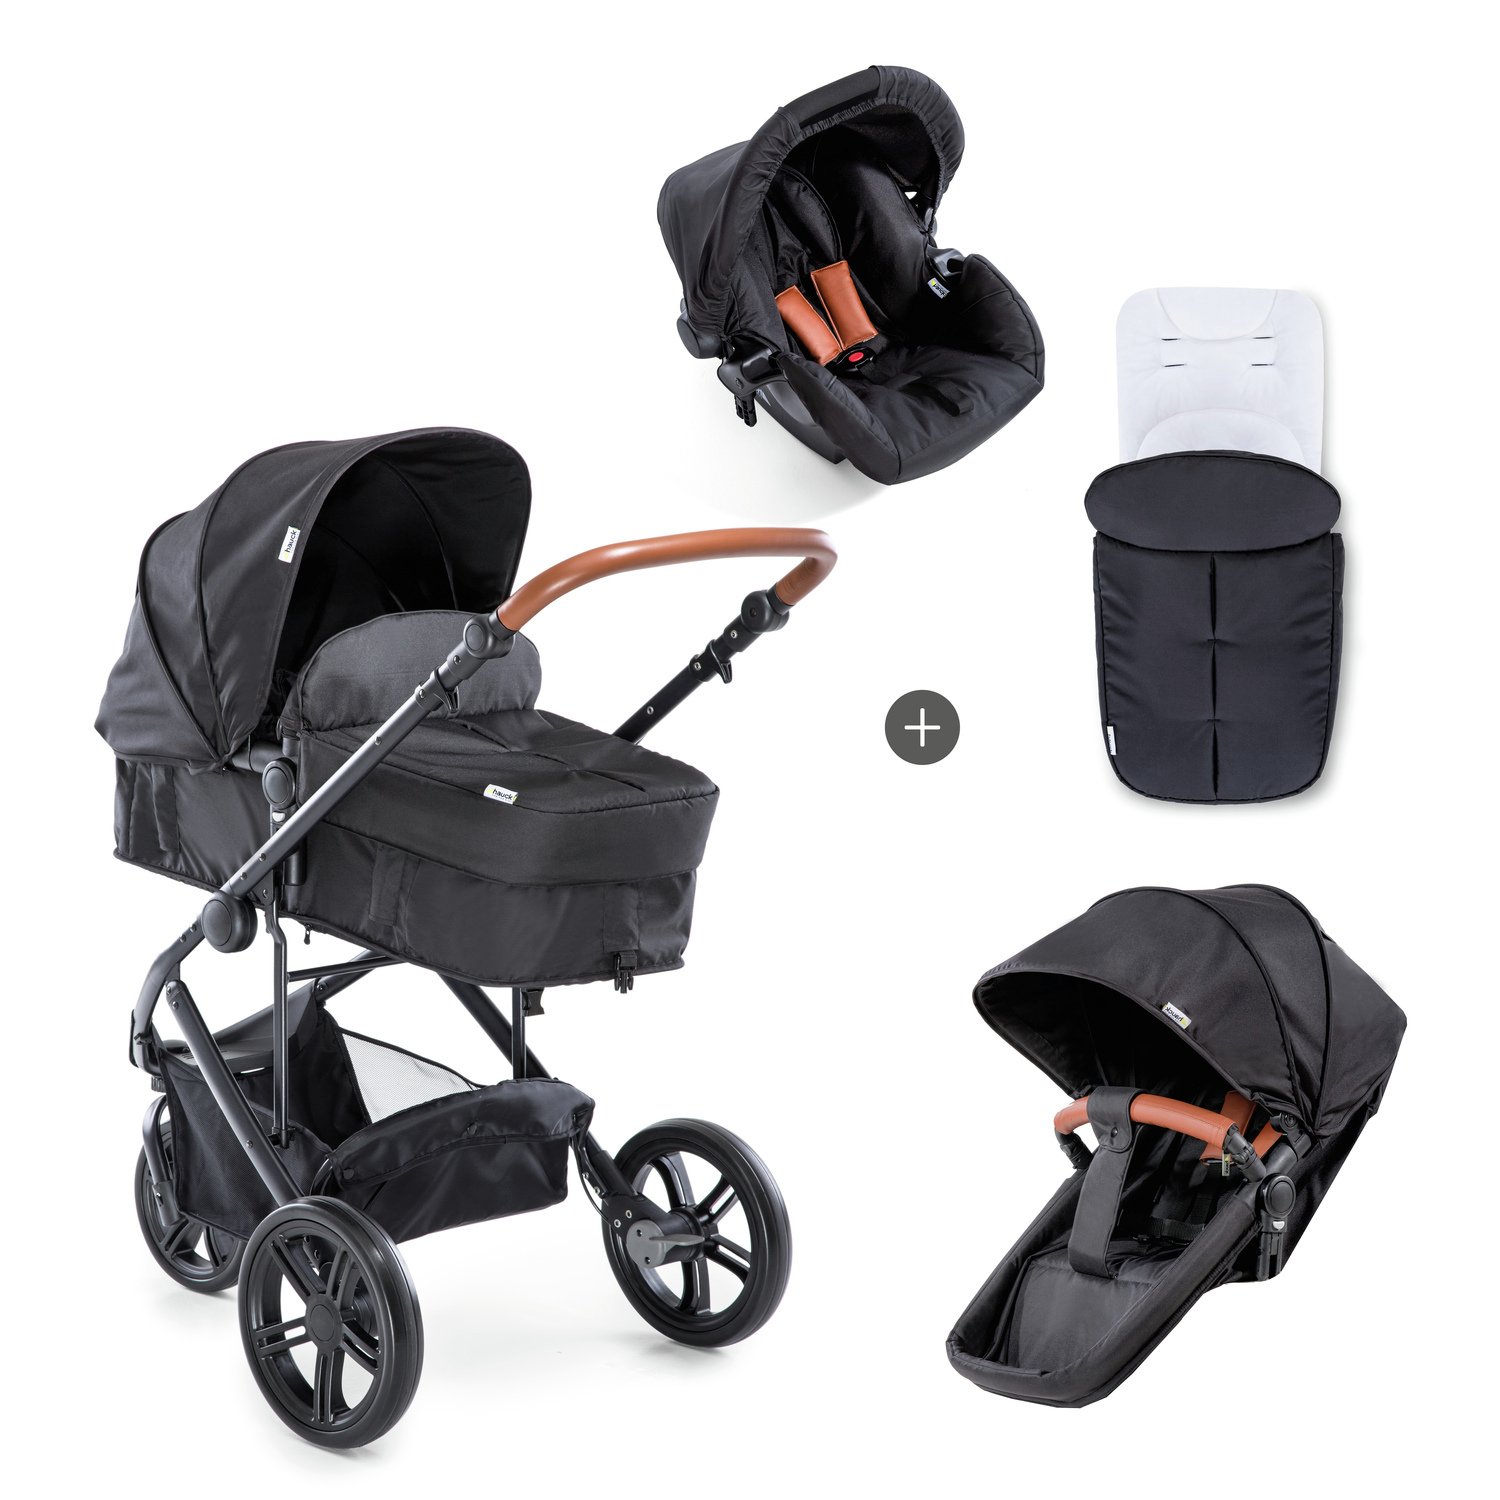 Hauck Pacific 3 Travel System Review